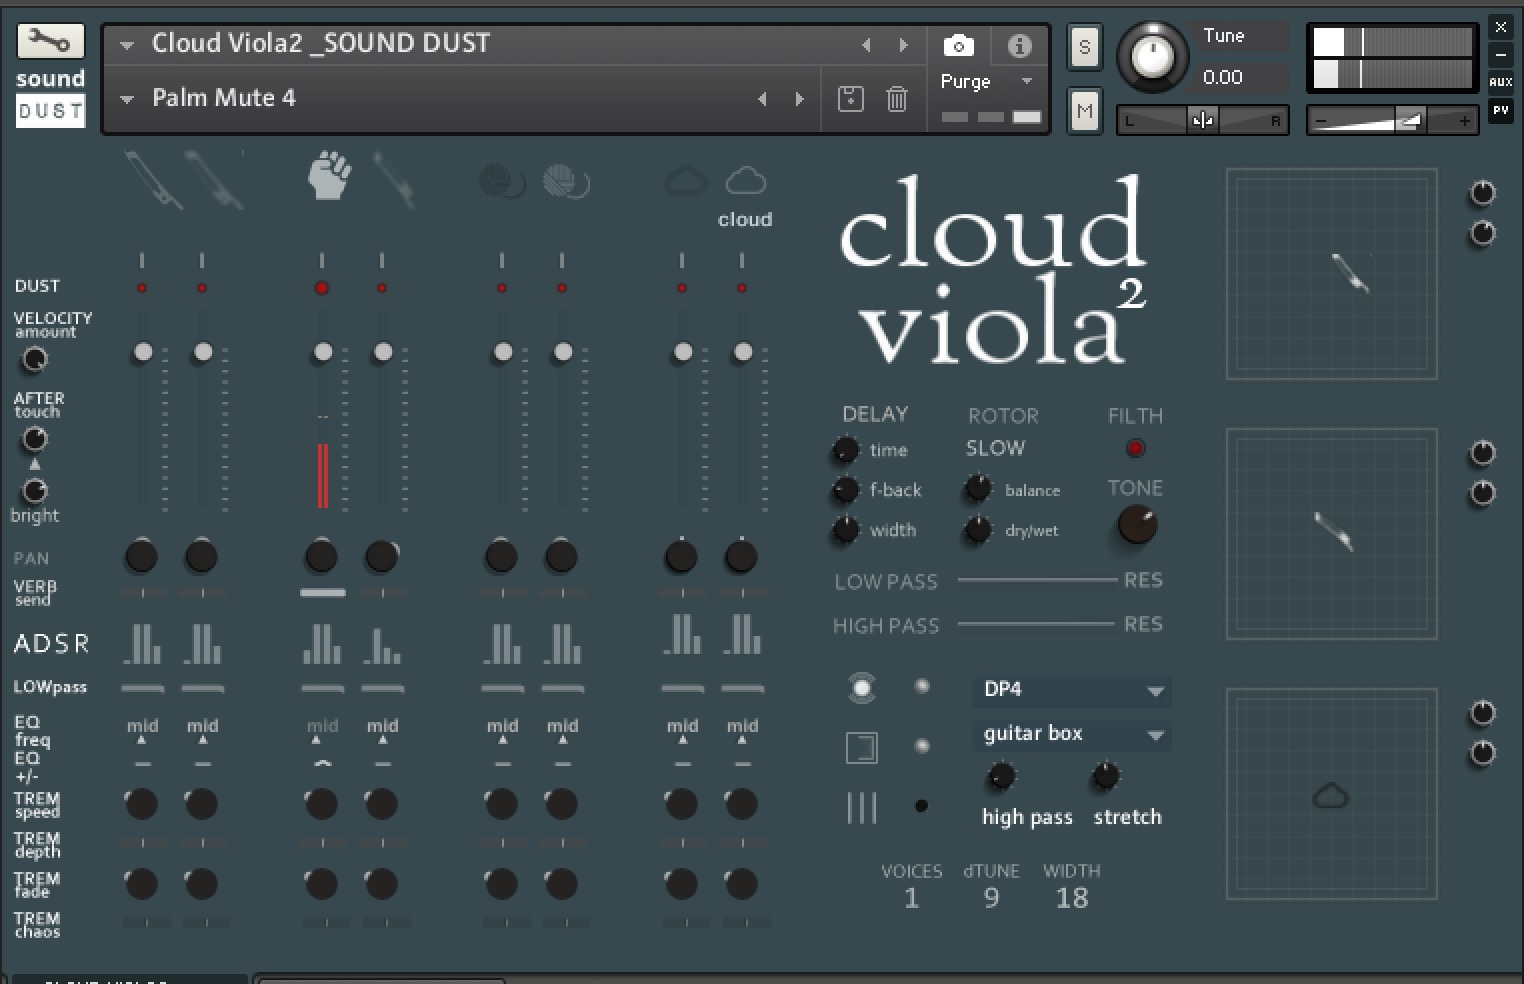 Cloud Viola2 by Sound Dust Review Overview